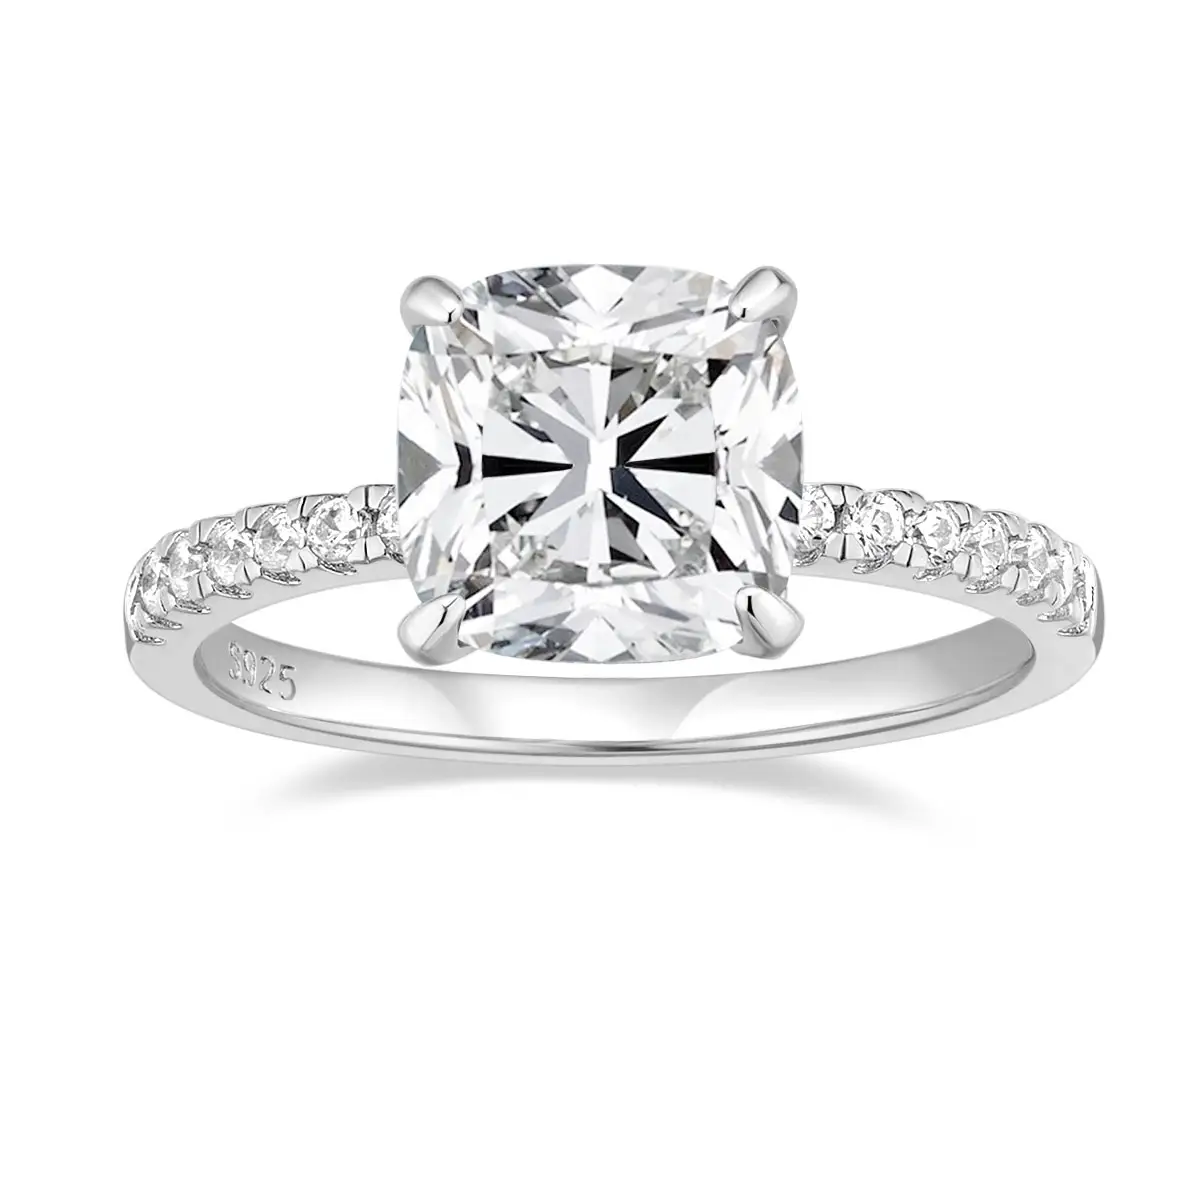 Somen 3.5CT 925 Sterling Silver Engagement Rings Cushion Cut Cubic Zirconia CZ Promise Rings Wedding Bands for Women Size 3-11